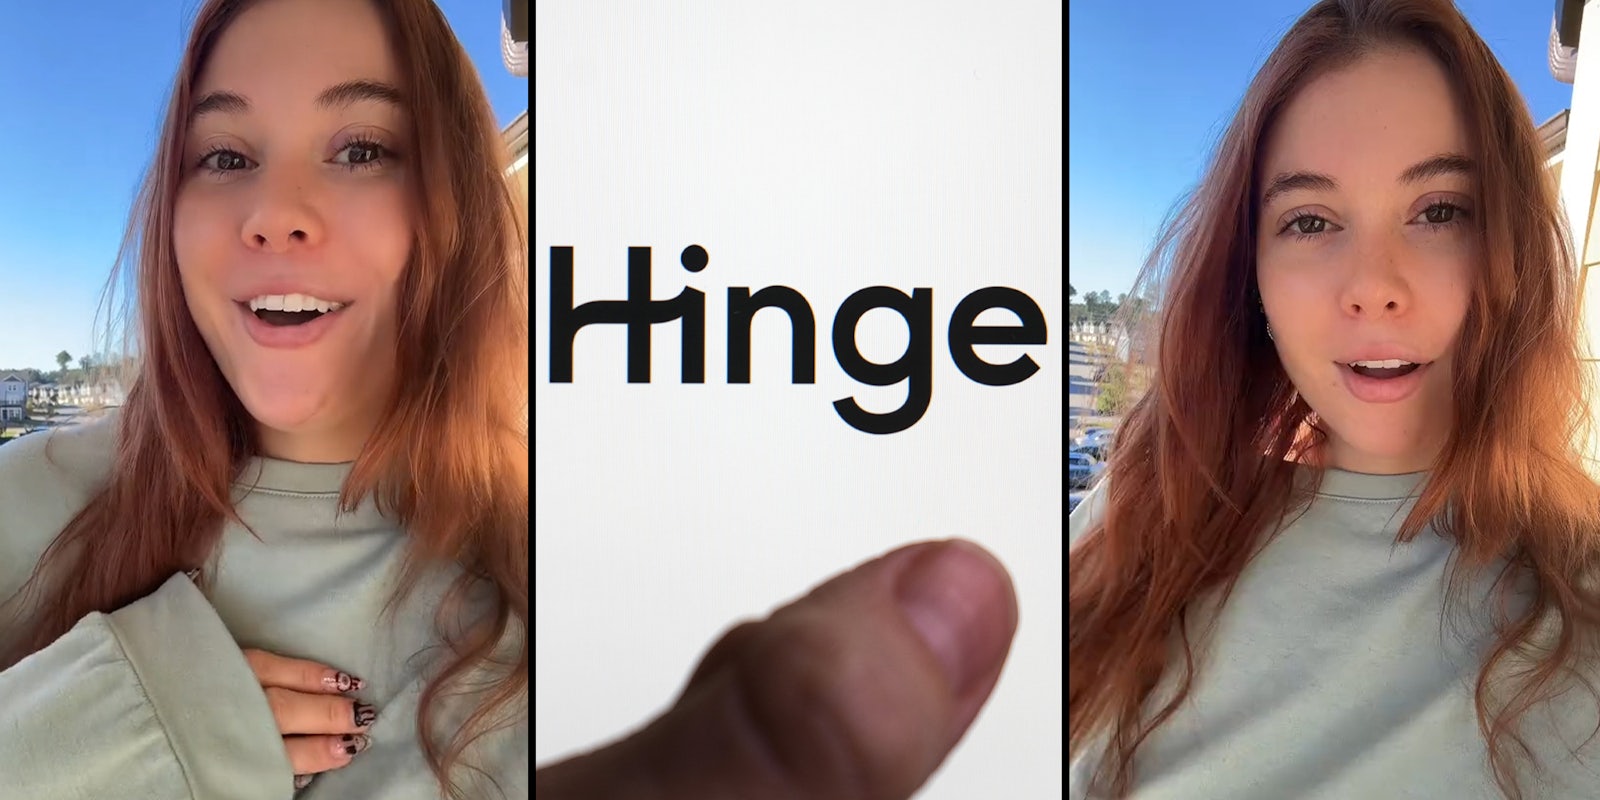 Woman’s discovers her boyfriend of 2 years has Hinge and says he forgot to delete it